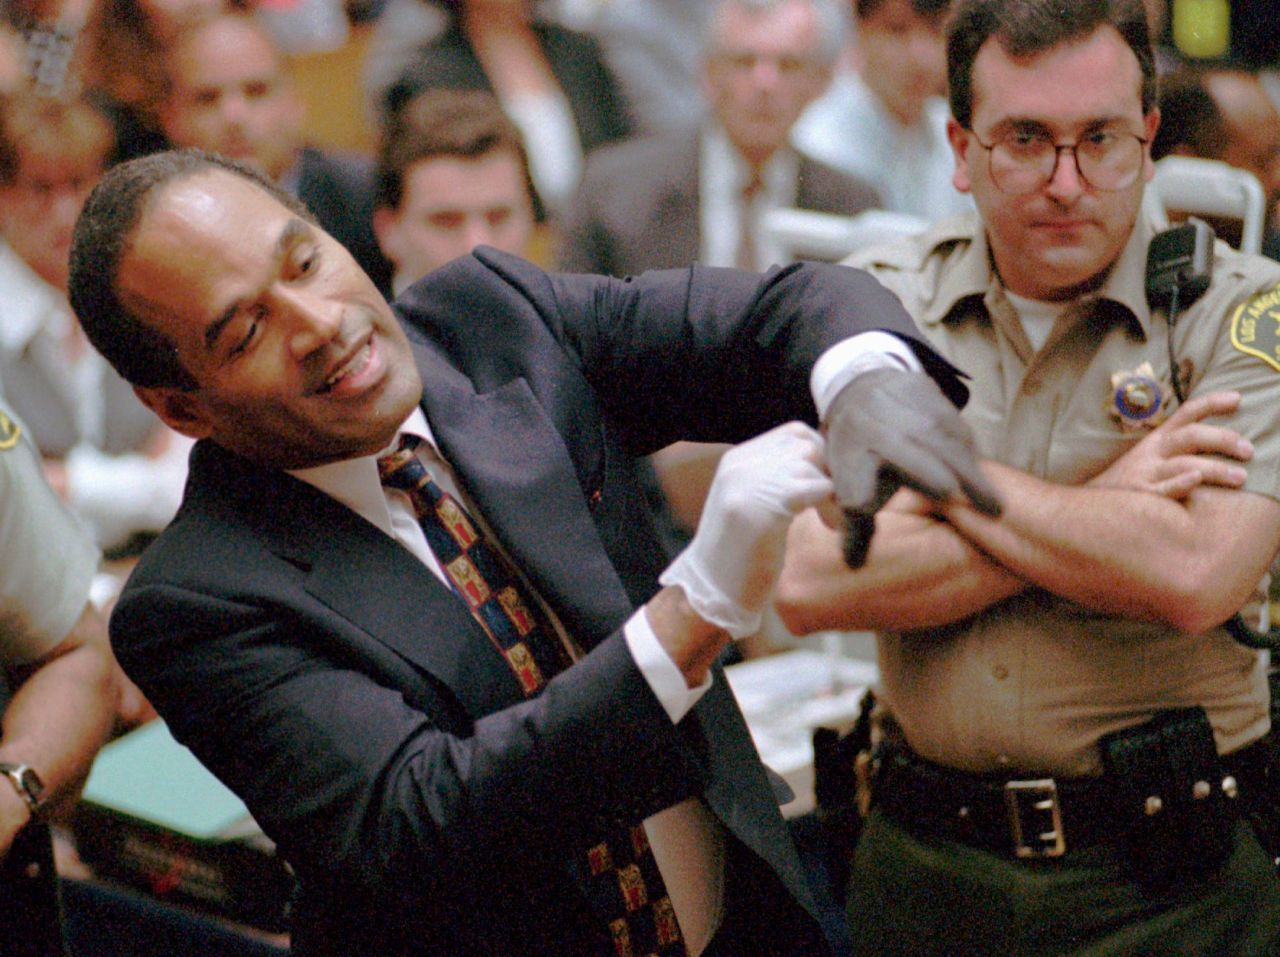 In one of the most memorable moments of a blockbuster murder trial in June 1995, O.J. Simpson struggled to fit his hand into a glove prosecutors claimed he wore the night his ex-wife Nicole Brown Simpson and Ronald Goldman were killed. The prosecution's request to have Simpson try the gloves on in court was a pivotal moment in the trial, which ended with the former NFL star's acquittal.